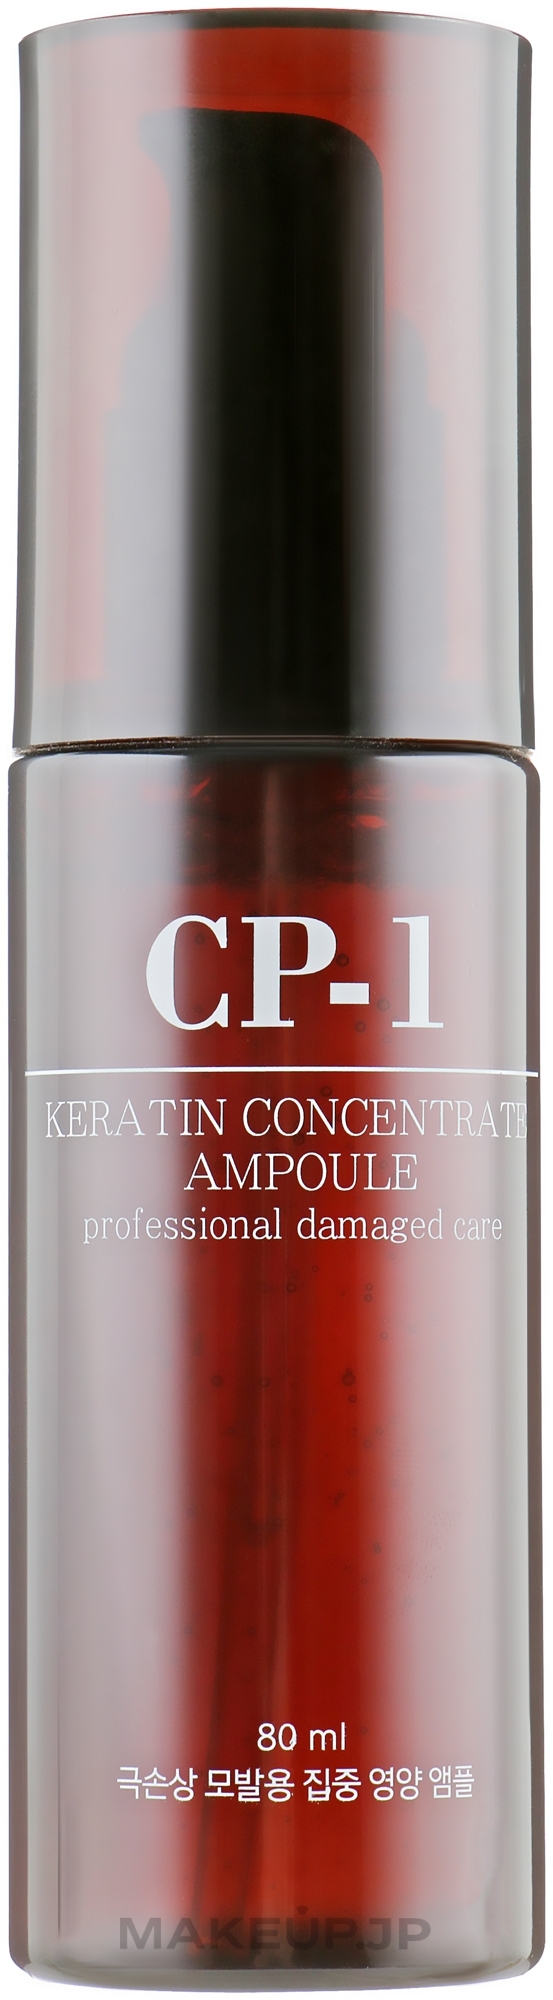 Concentrated Keratin Hair Essence - Esthetic House CP-1 Keratin Concentrate Ampoule — photo 80 ml